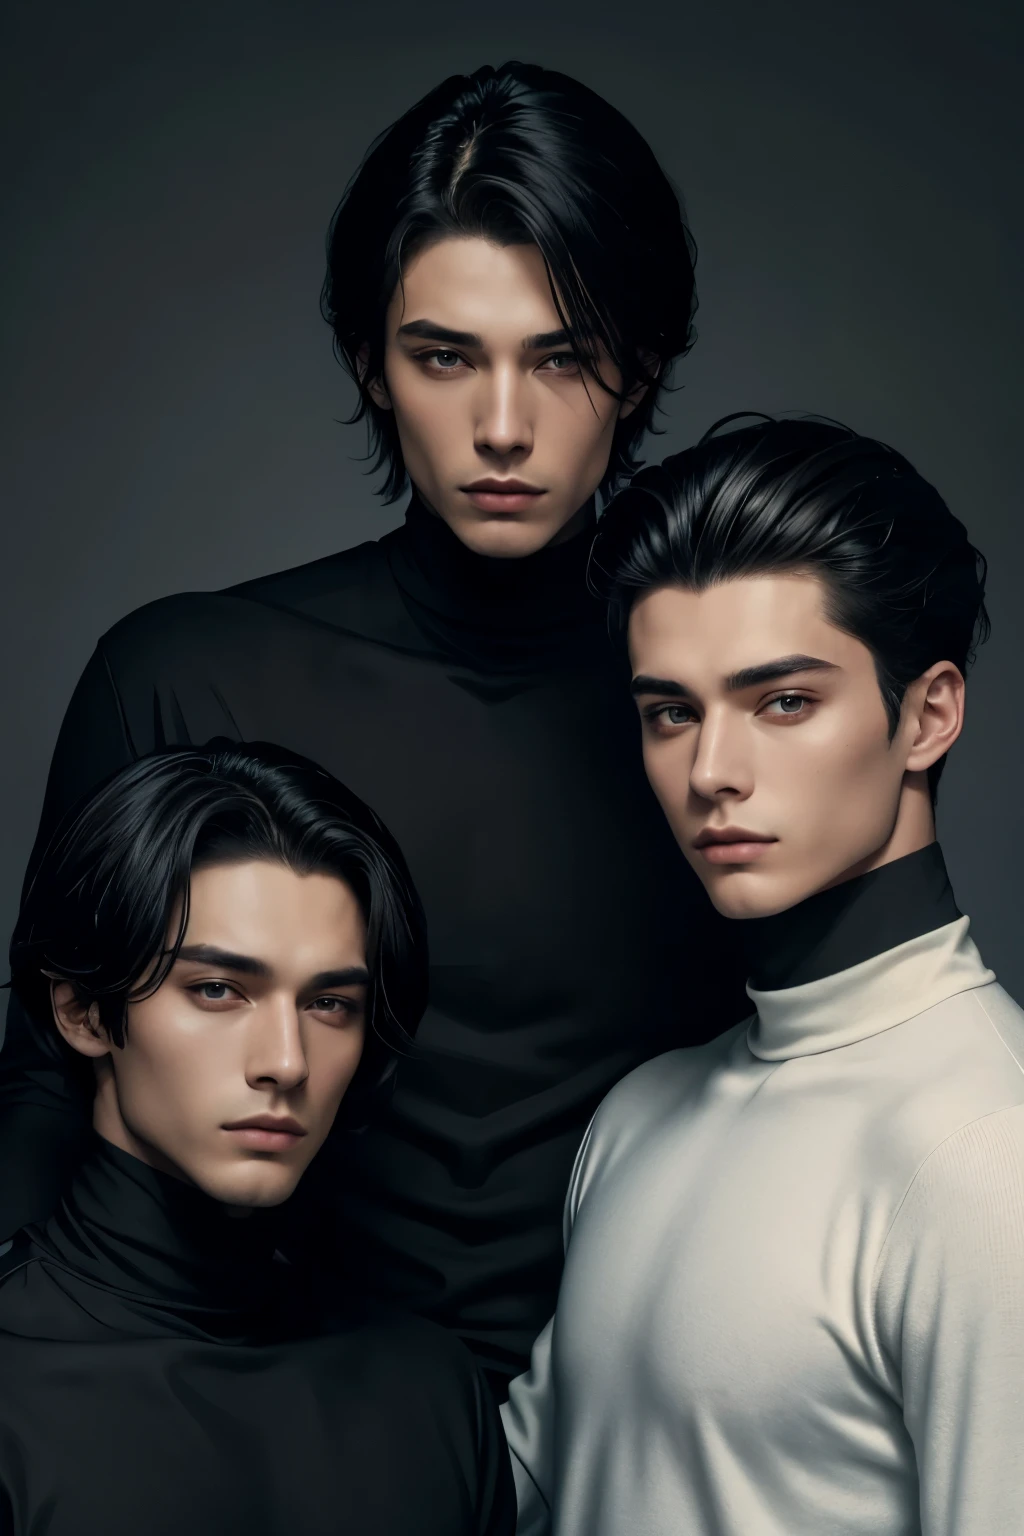 three beautiful young men, 25 years old each, they are wearing a turtleneck and long-sleeved shirt, in black, their faces are close to each other, they are in a fashion and beauty photo shoot, the image is of bust and face, fashion editorial, fashion guys, bust and face, samurai cut hair.